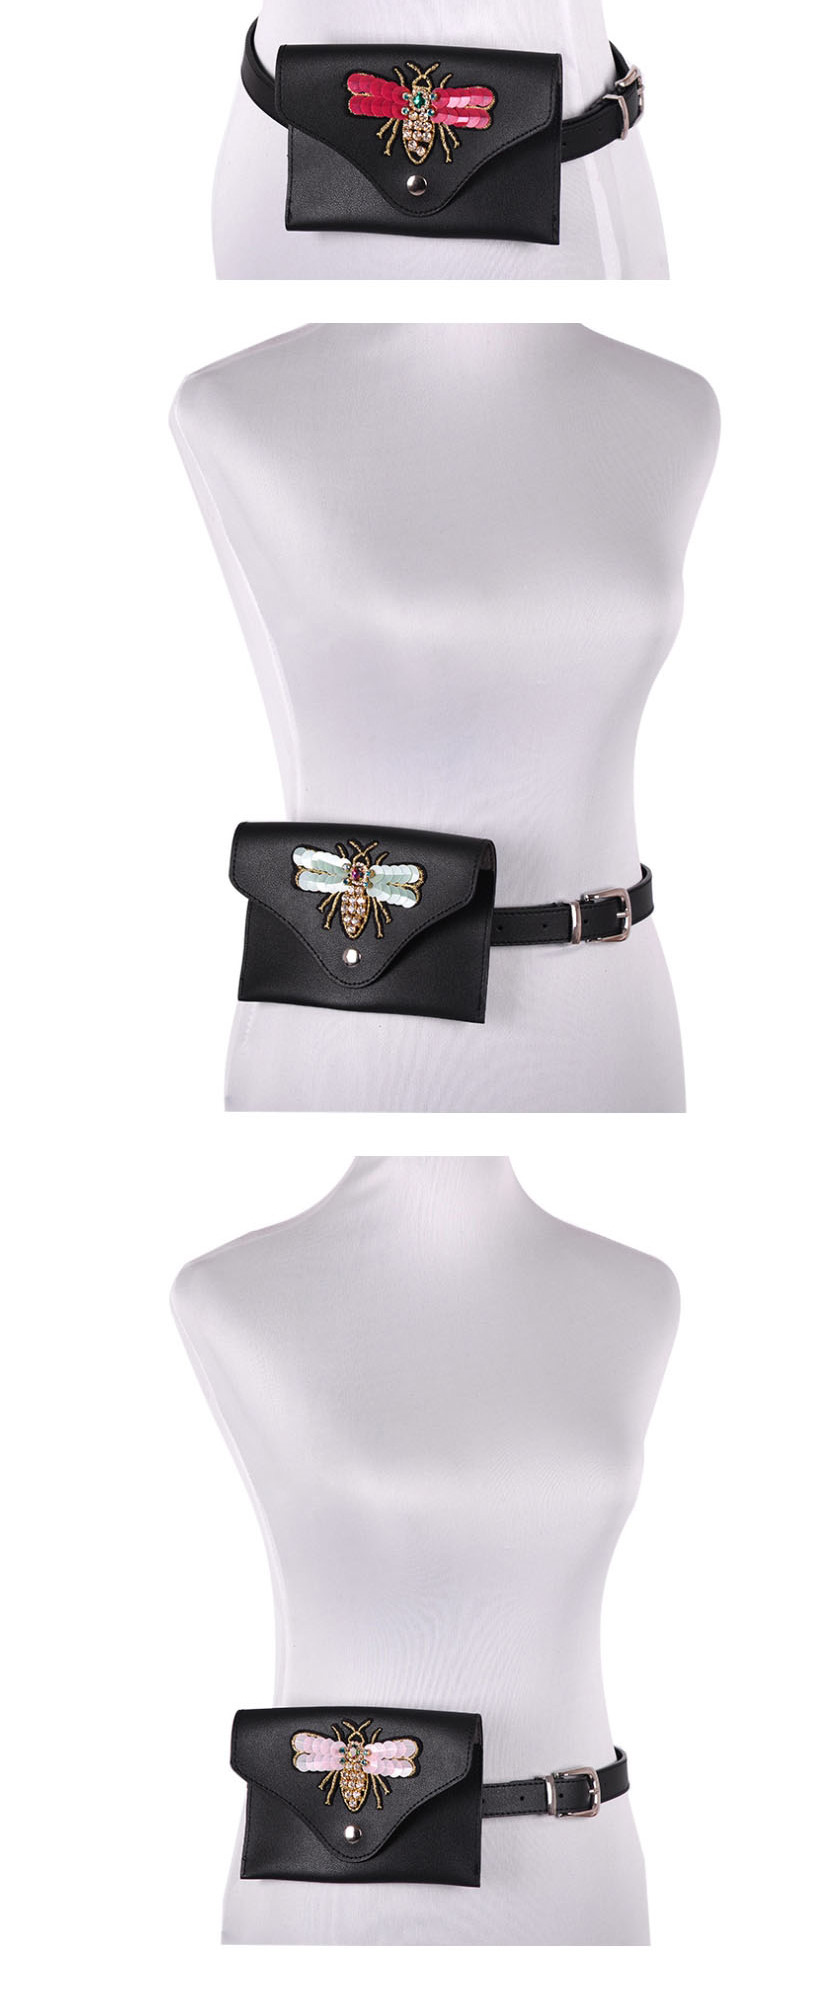 Fashion Red Bevel Diagonal Belt Buckle Belt With Diamond Sequins,Thin belts